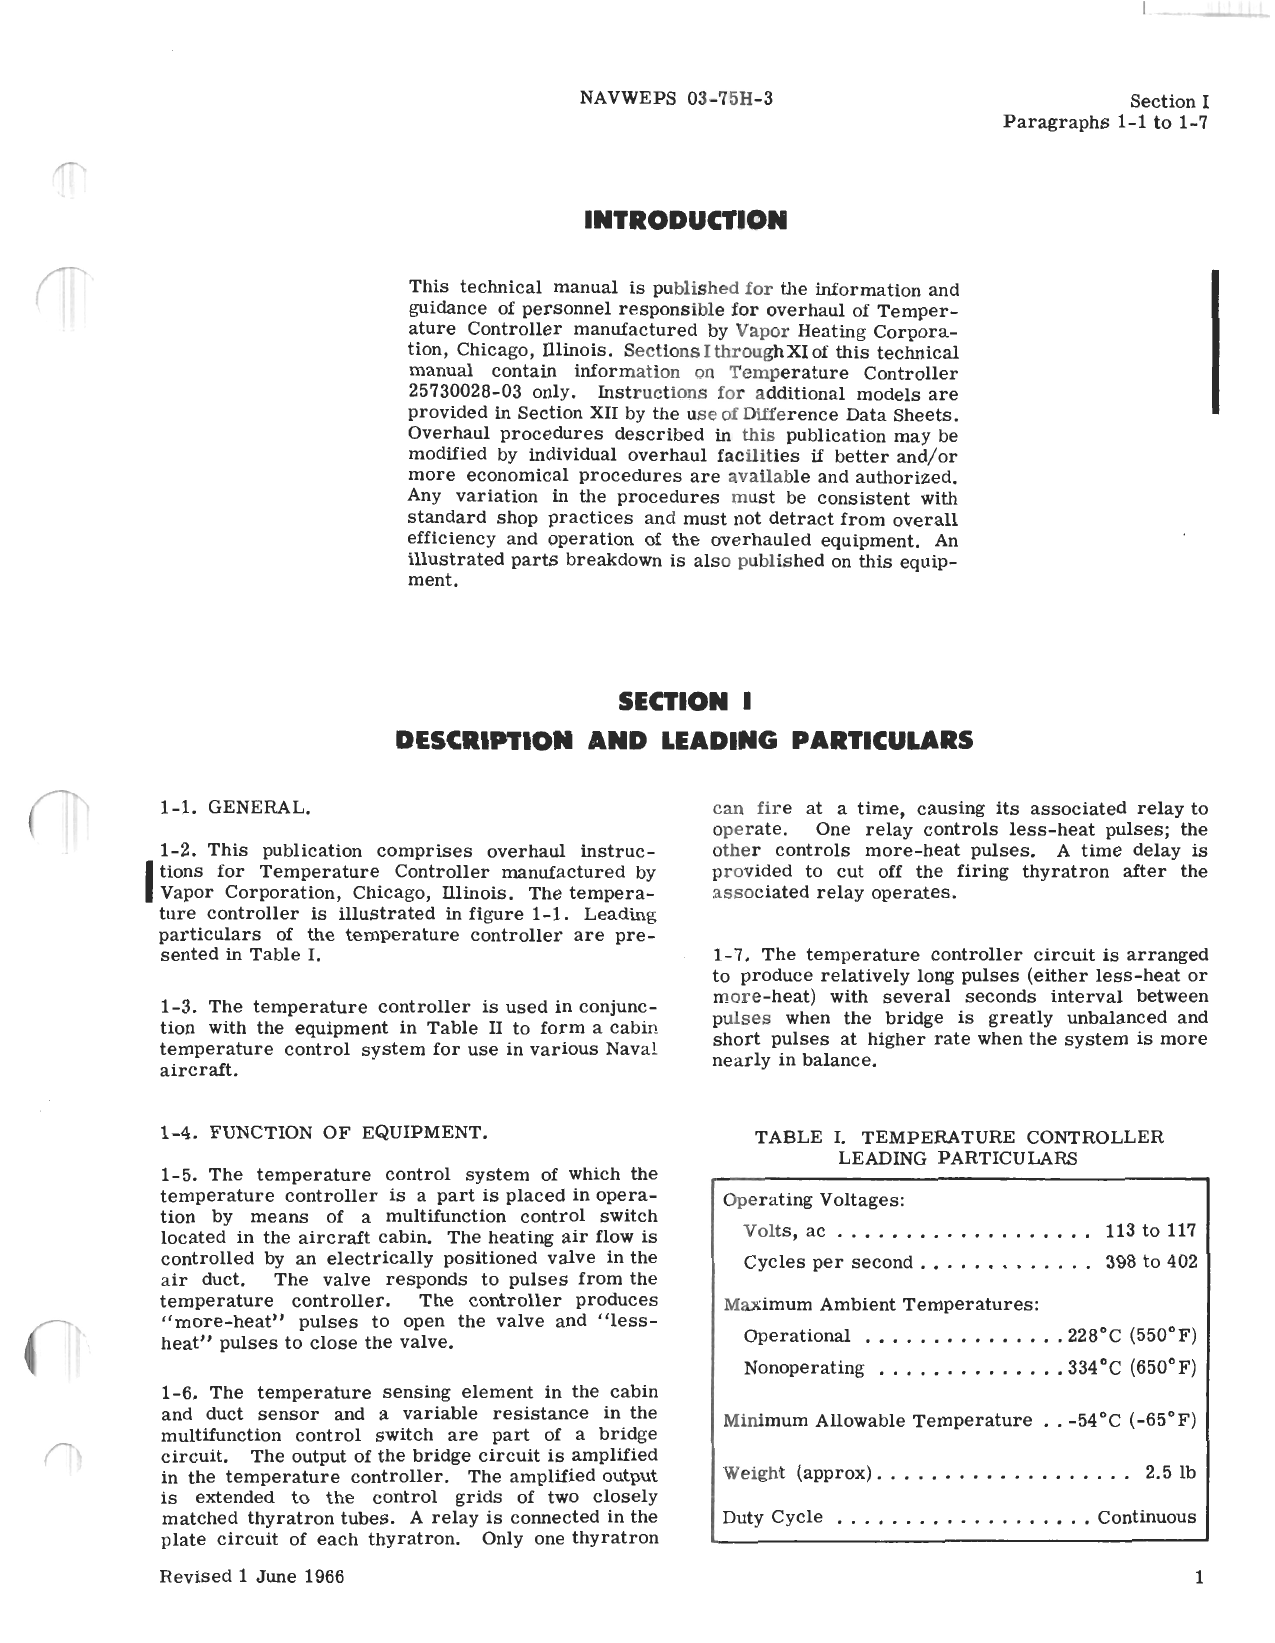 Sample page 5 from AirCorps Library document: Overhaul Instructions for Temperature Controller - Parts 25730028-03 and 25730028-04 